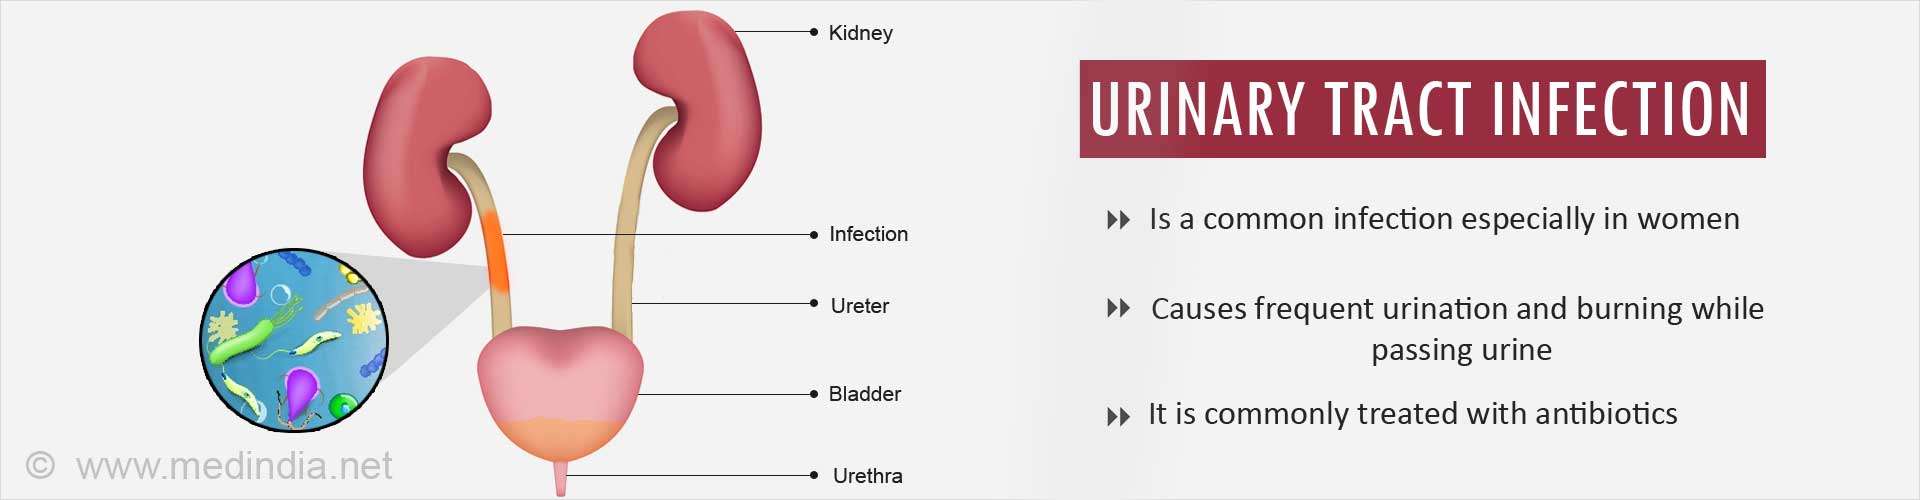 How to Prevent Urinary Tract Infection Recurrence Without ...